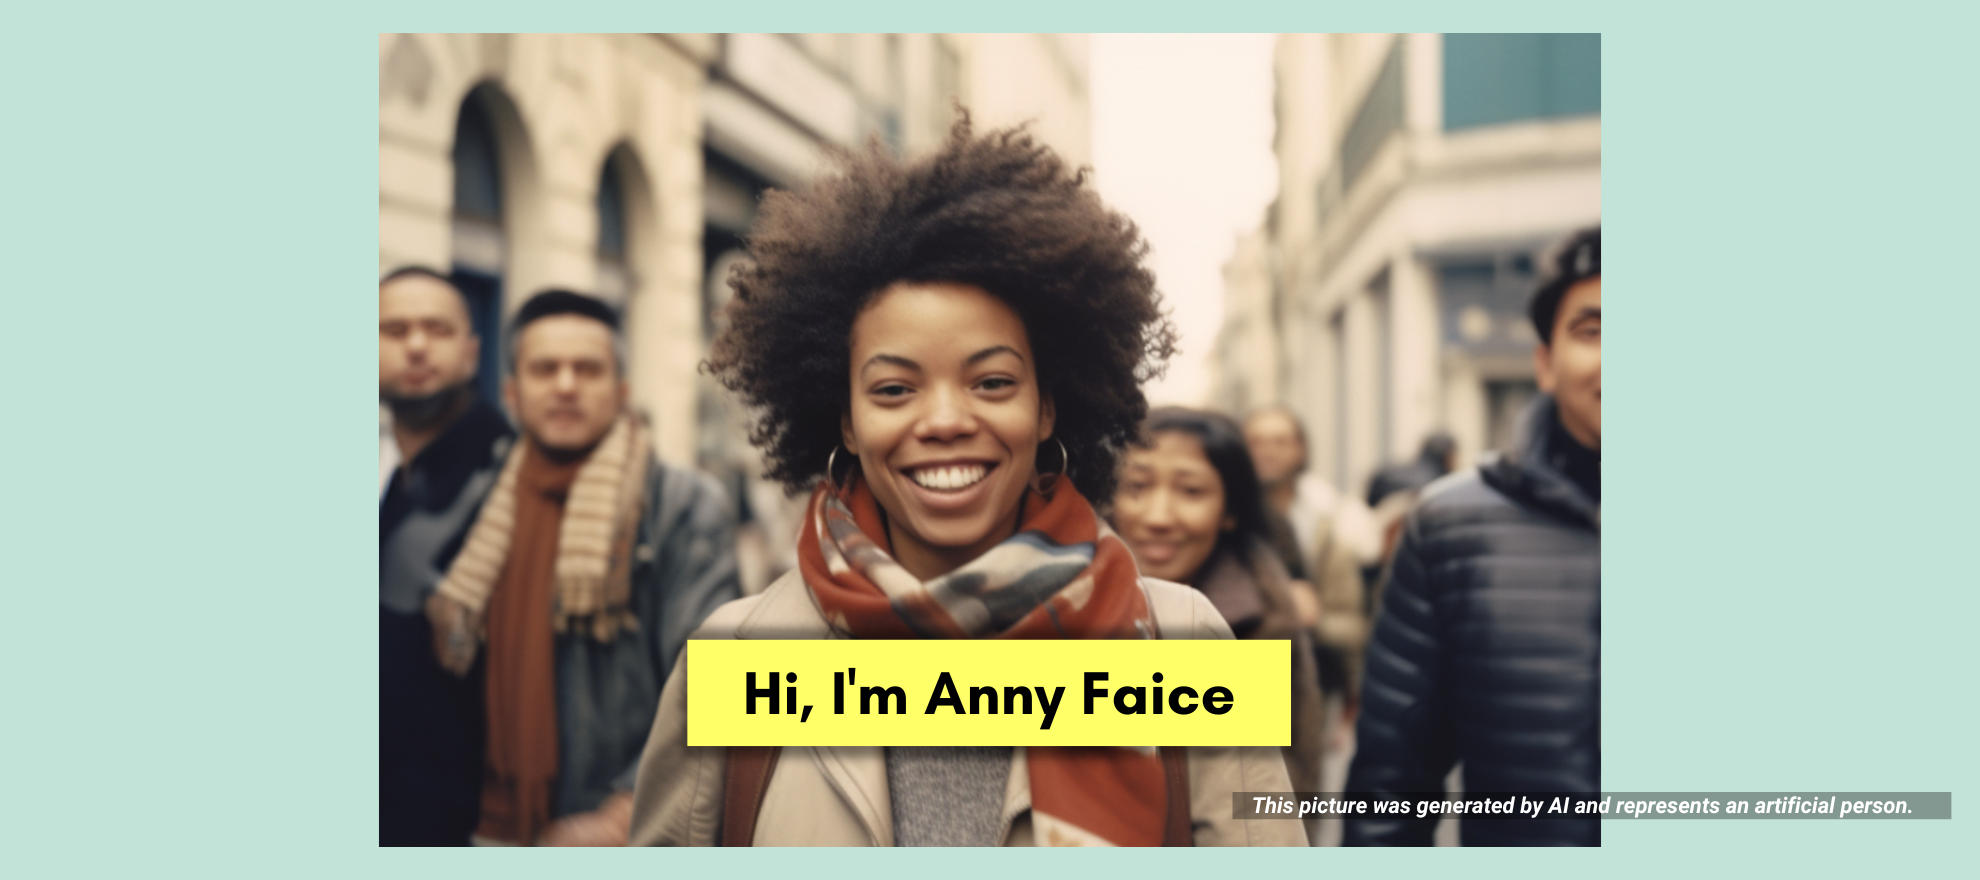 Meet Anny Faice - The new Social AI-Activist for Statelessness